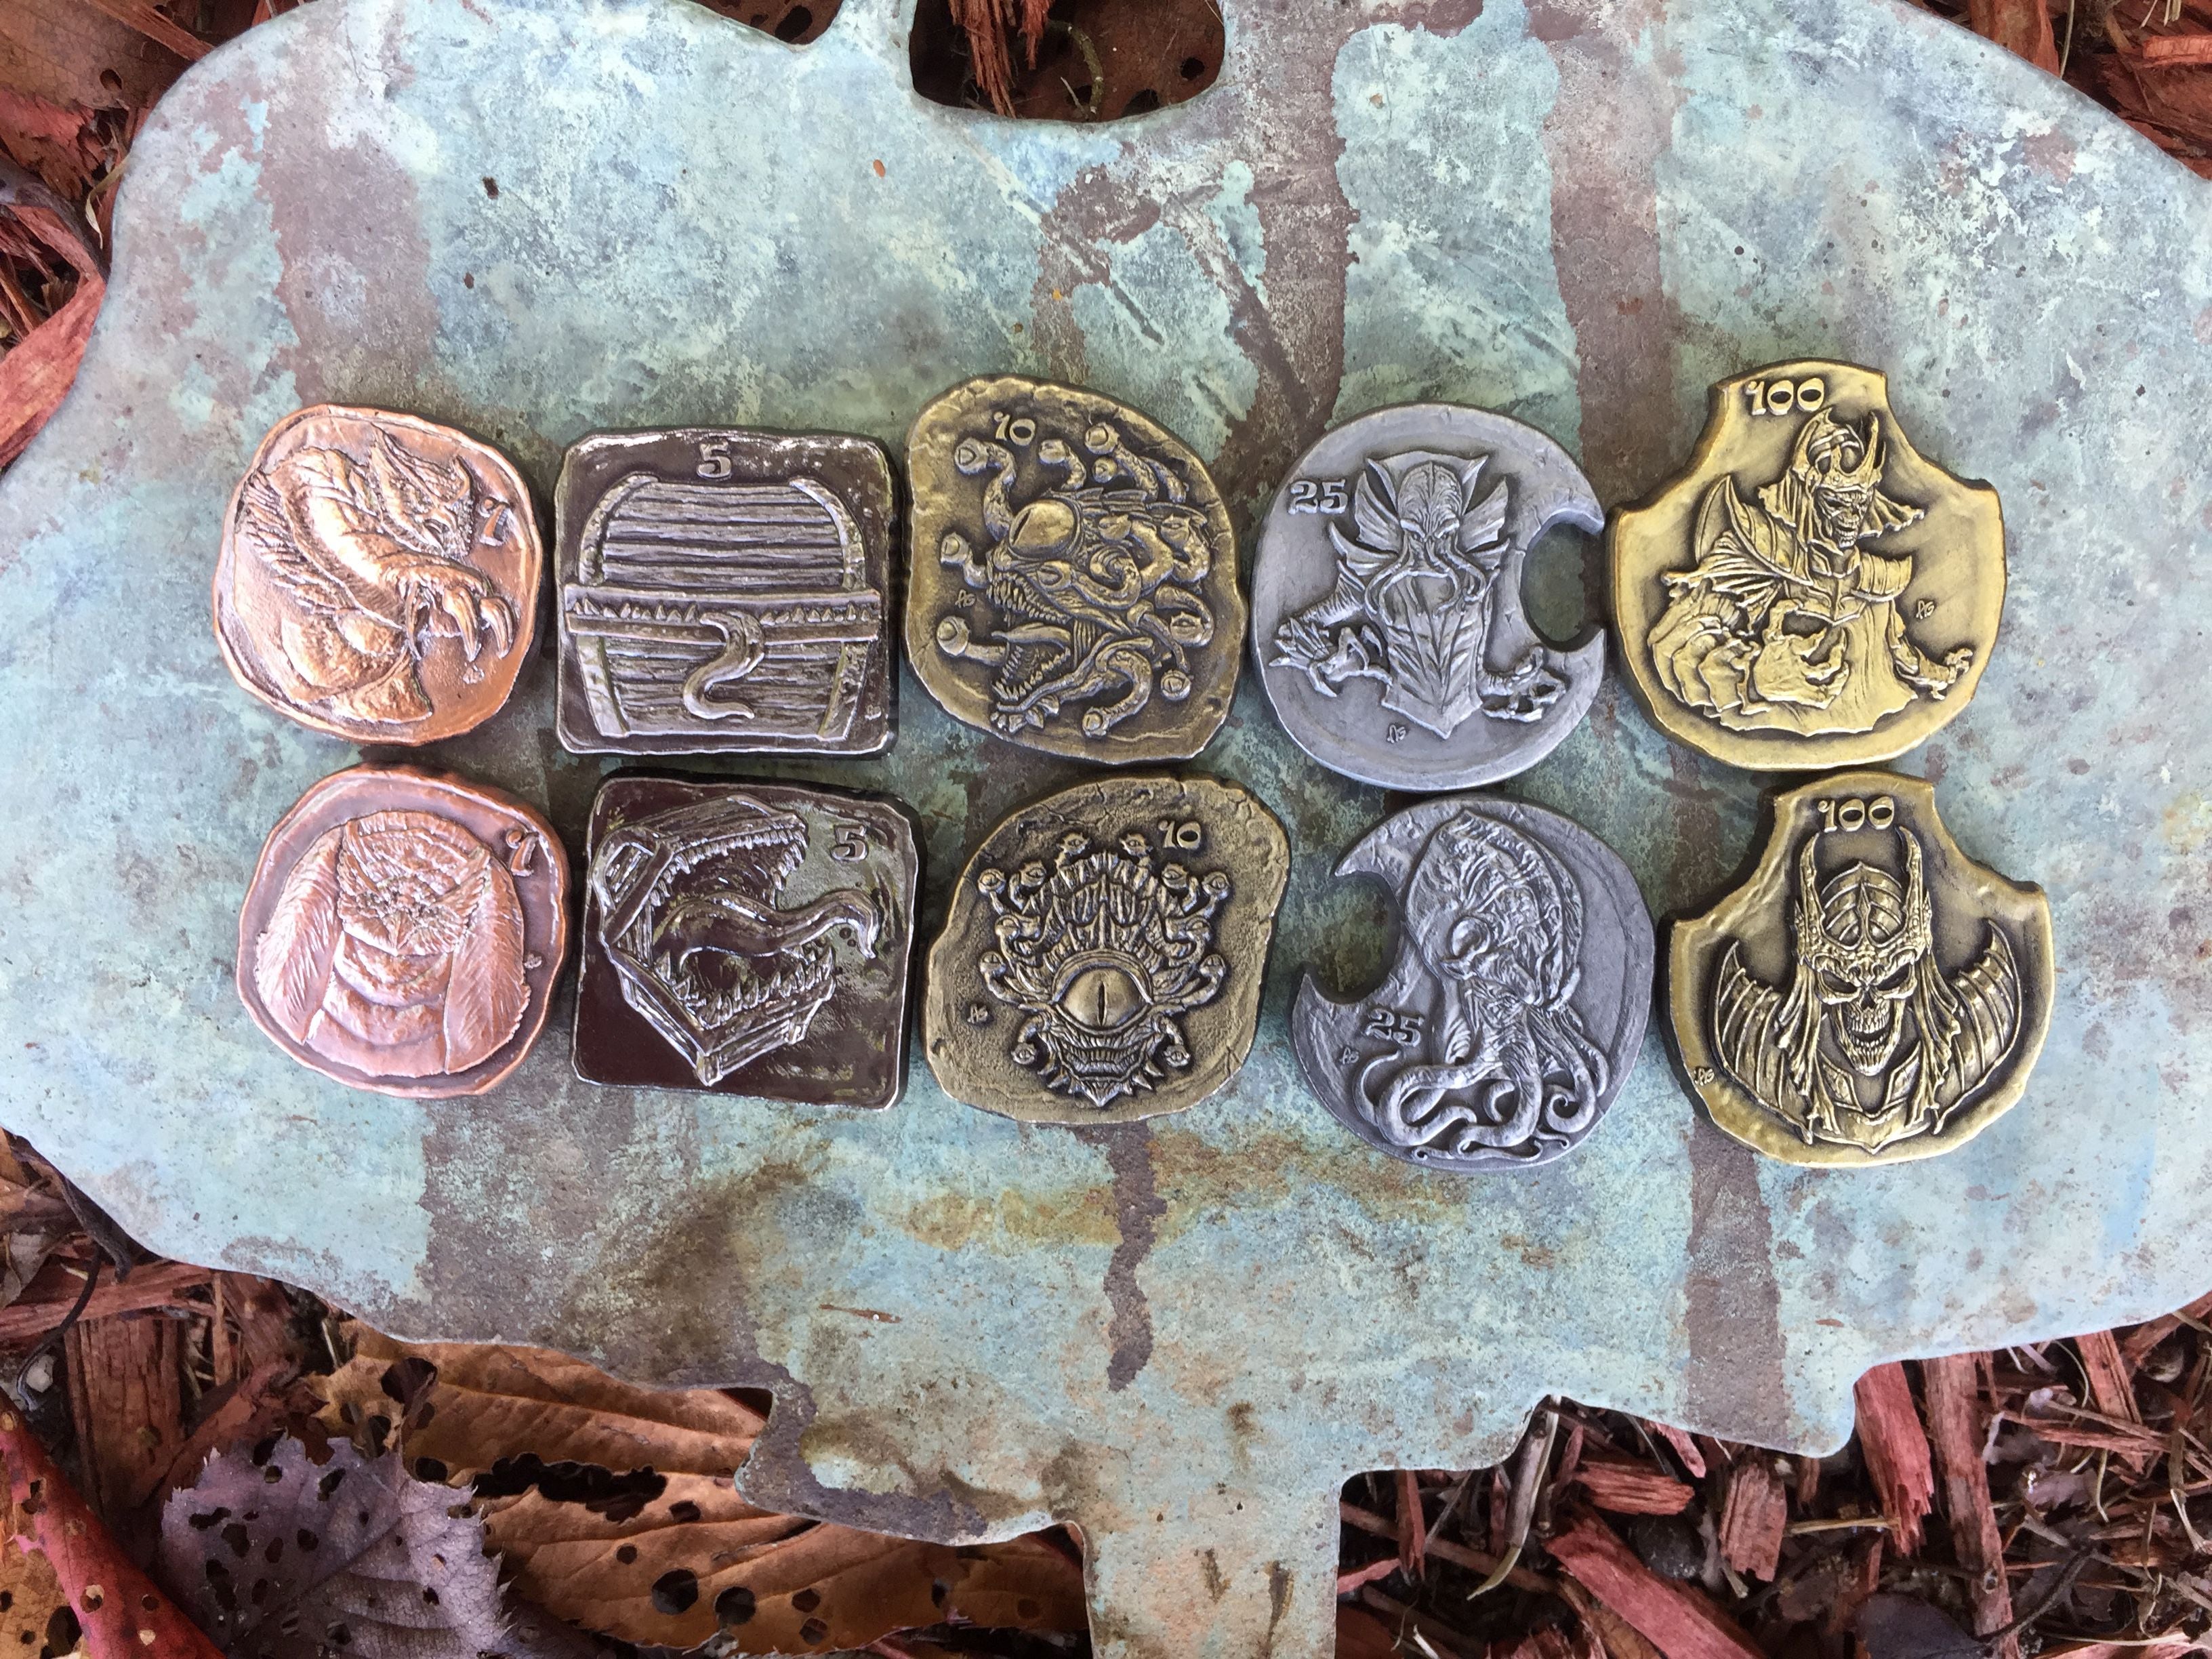 Adventure Coins – Pirates Metal Coins Set of 10